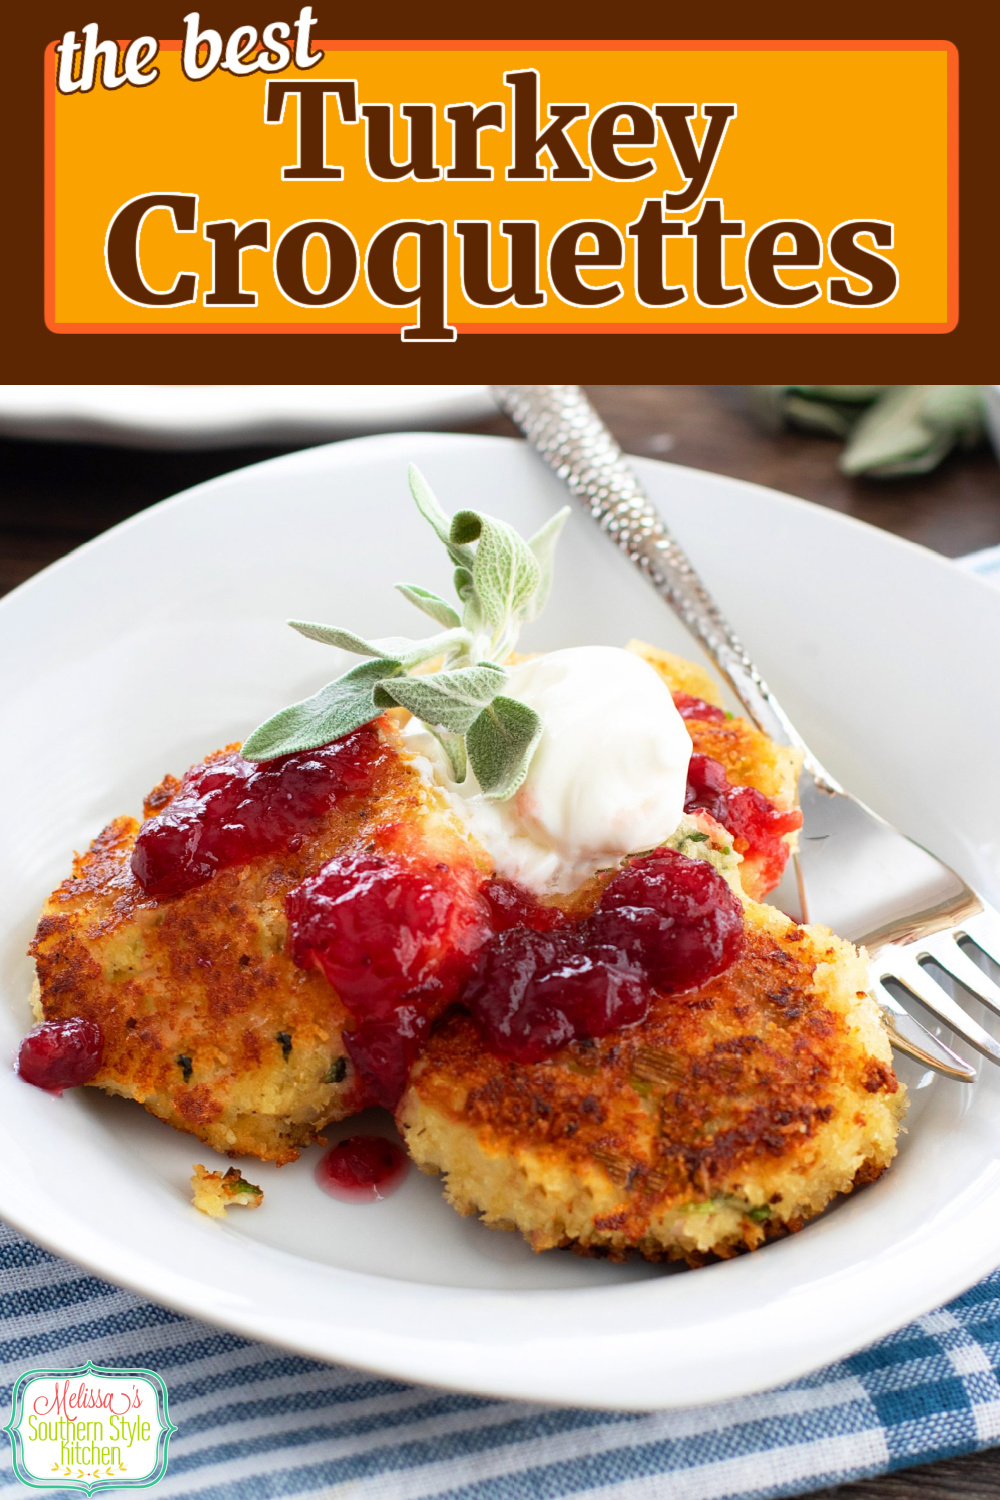 Reinvent leftovers into these crispy Turkey Croquettes topped with sour cream and a drizzle of cranberry sauce for a post holiday meal #turkeyrecipes #leftoverturkeyrecipes #turkeycakes #turkeycroquettes #croquettes #poultry #easyturkeyrecipes via @melissasssk